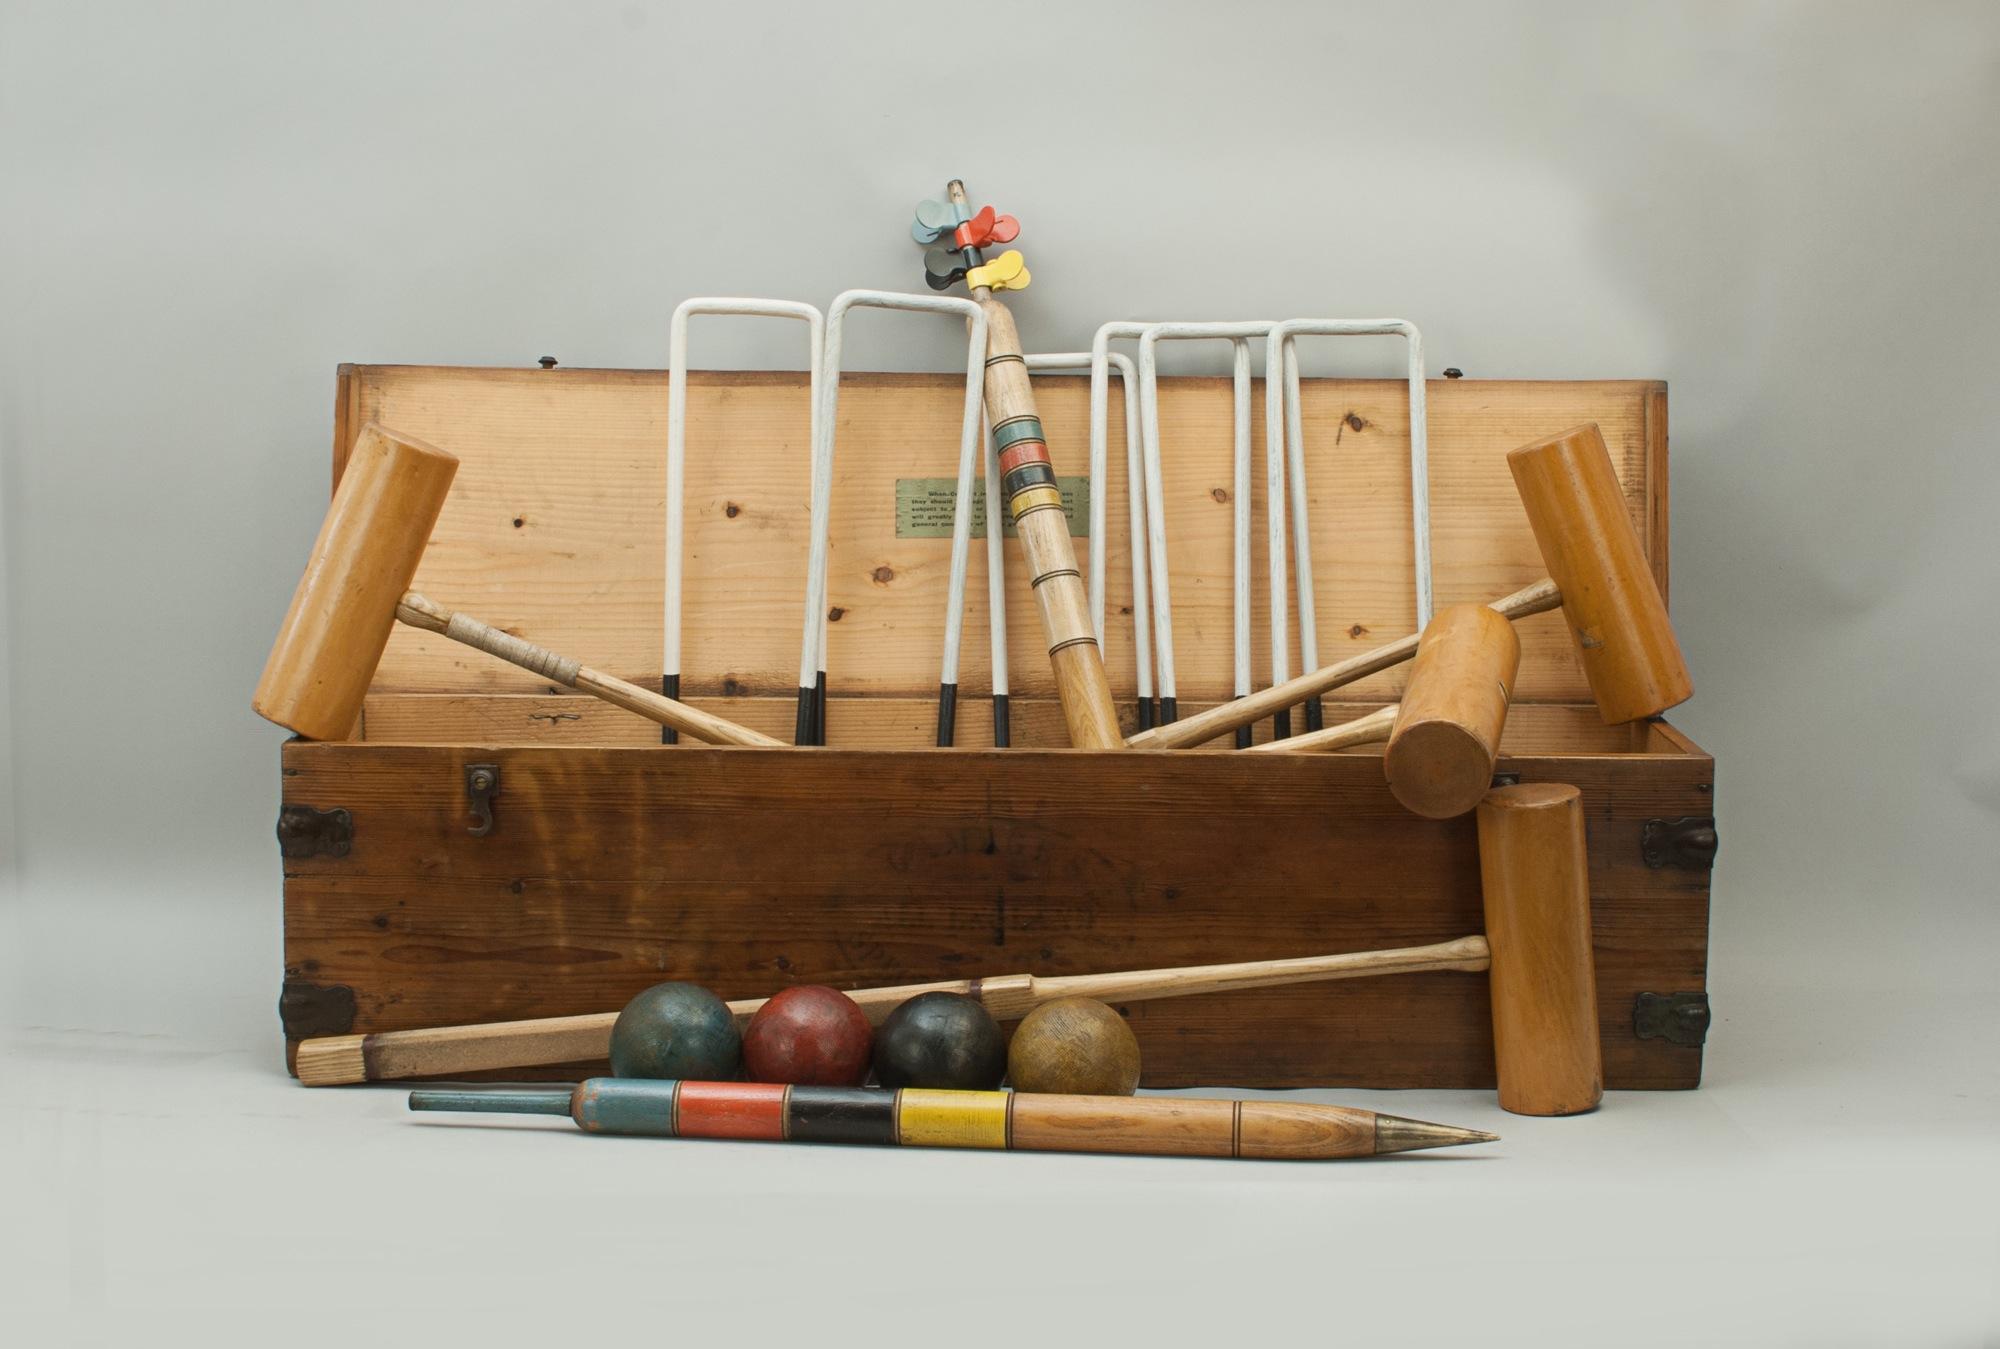 Vintage A.W. Gamage Ltd. Croquet Set.
A high quality A.W. Gamage Ltd, London, croquet set in its original polished pine box. The set comes with four box wood croquet mallets with ebony guide lines on the tops of the heads, the remains of an 'A.W.